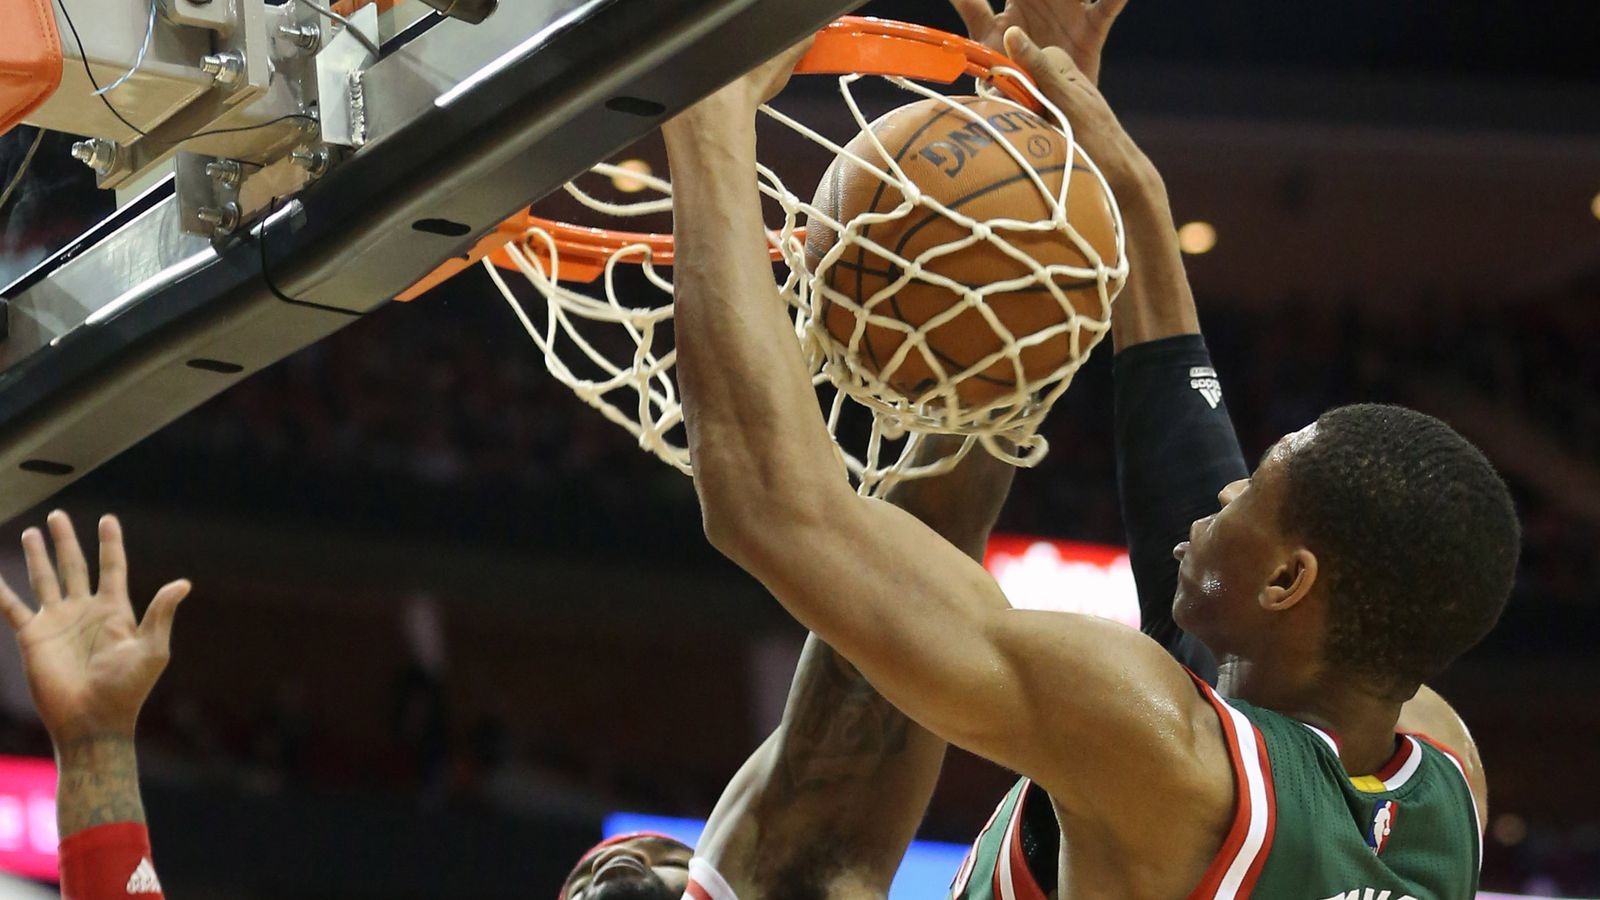 VIDEO: Giannis Antetokounmpo dunked 95 times this year ...